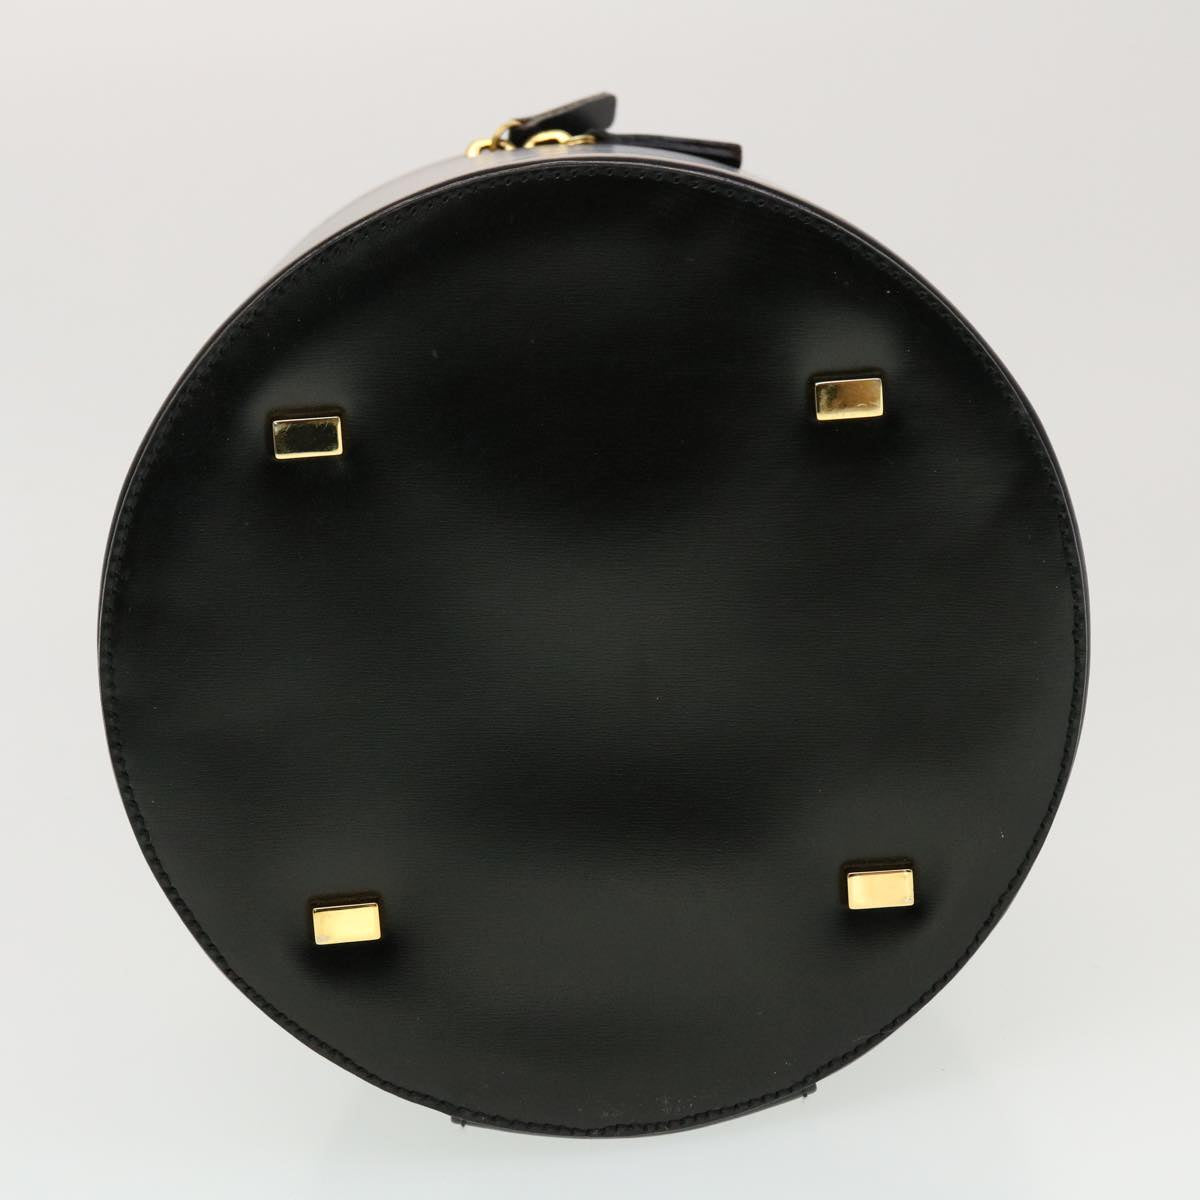 CELINE Vanity Cosmetic Pouch Leather Black Auth 43930